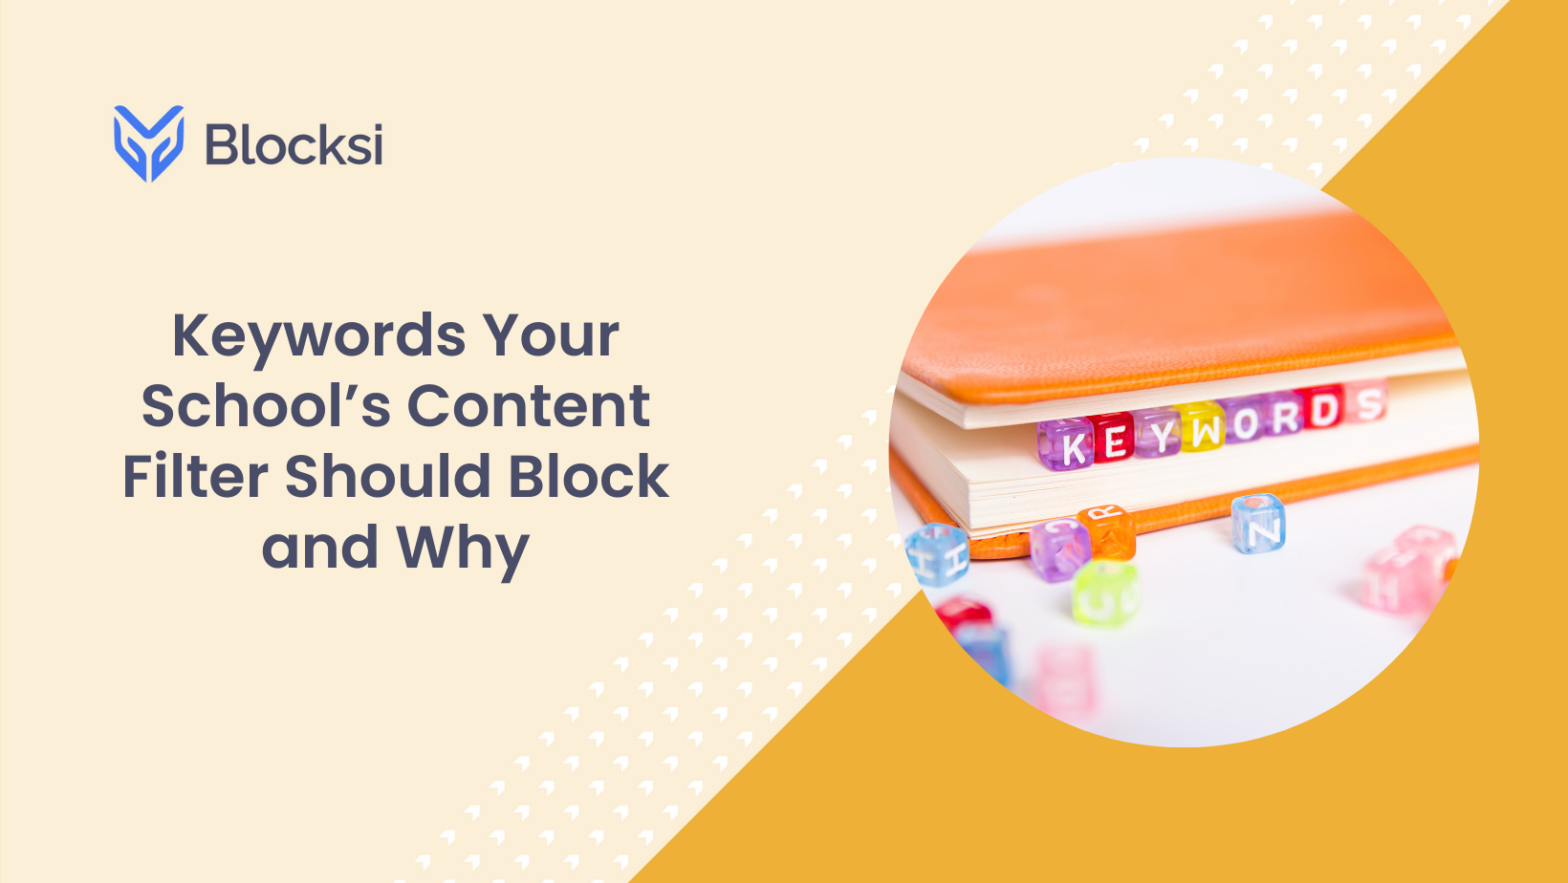 Keywords Your School’s Content Filter Should Block and Why